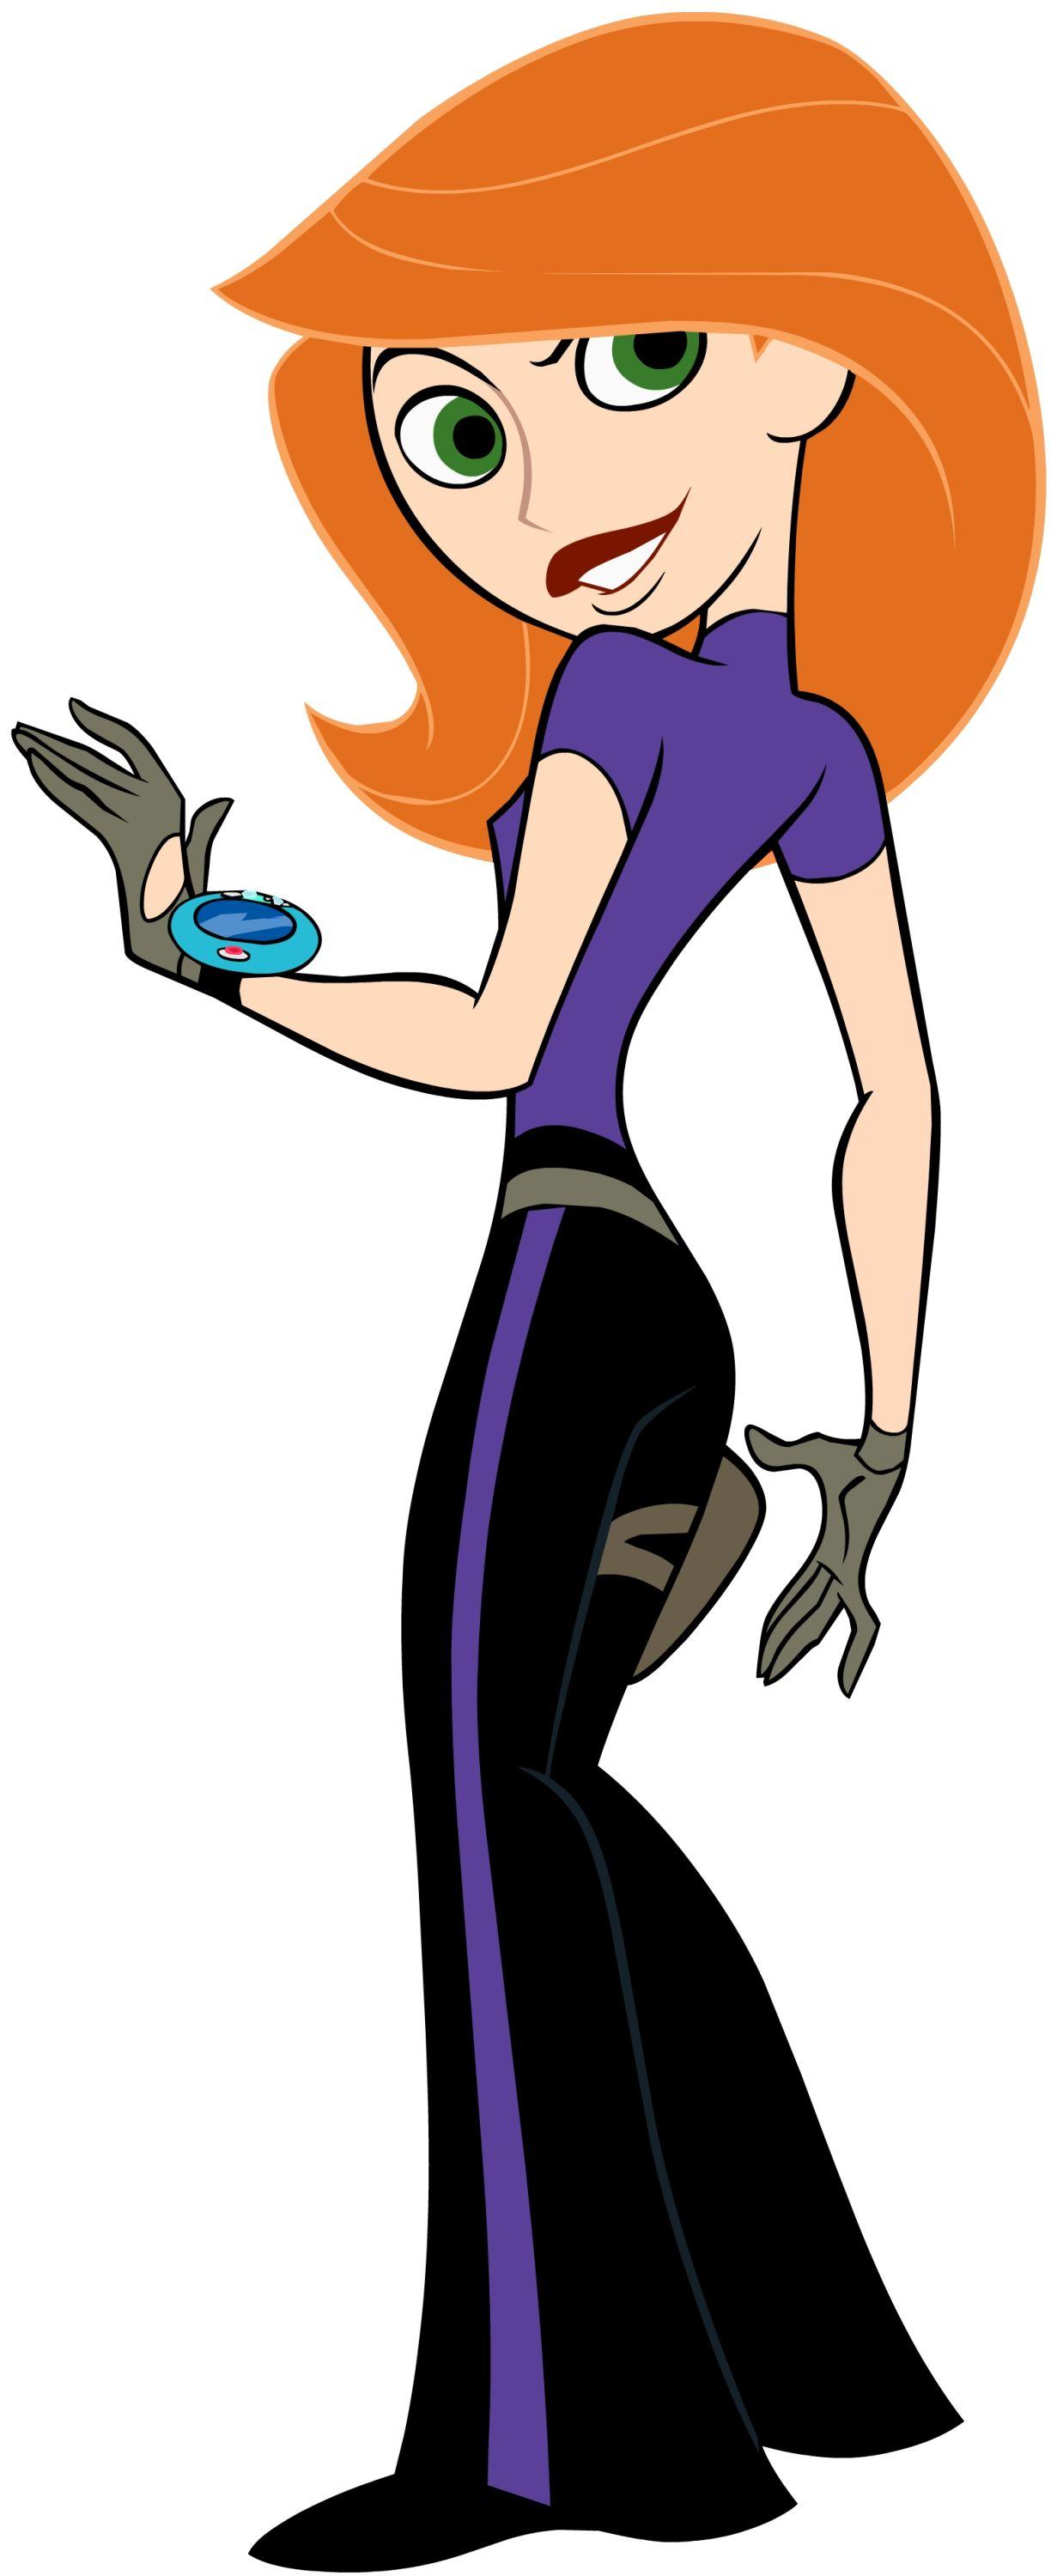 Free kim possible clipart Collection. Kim possible